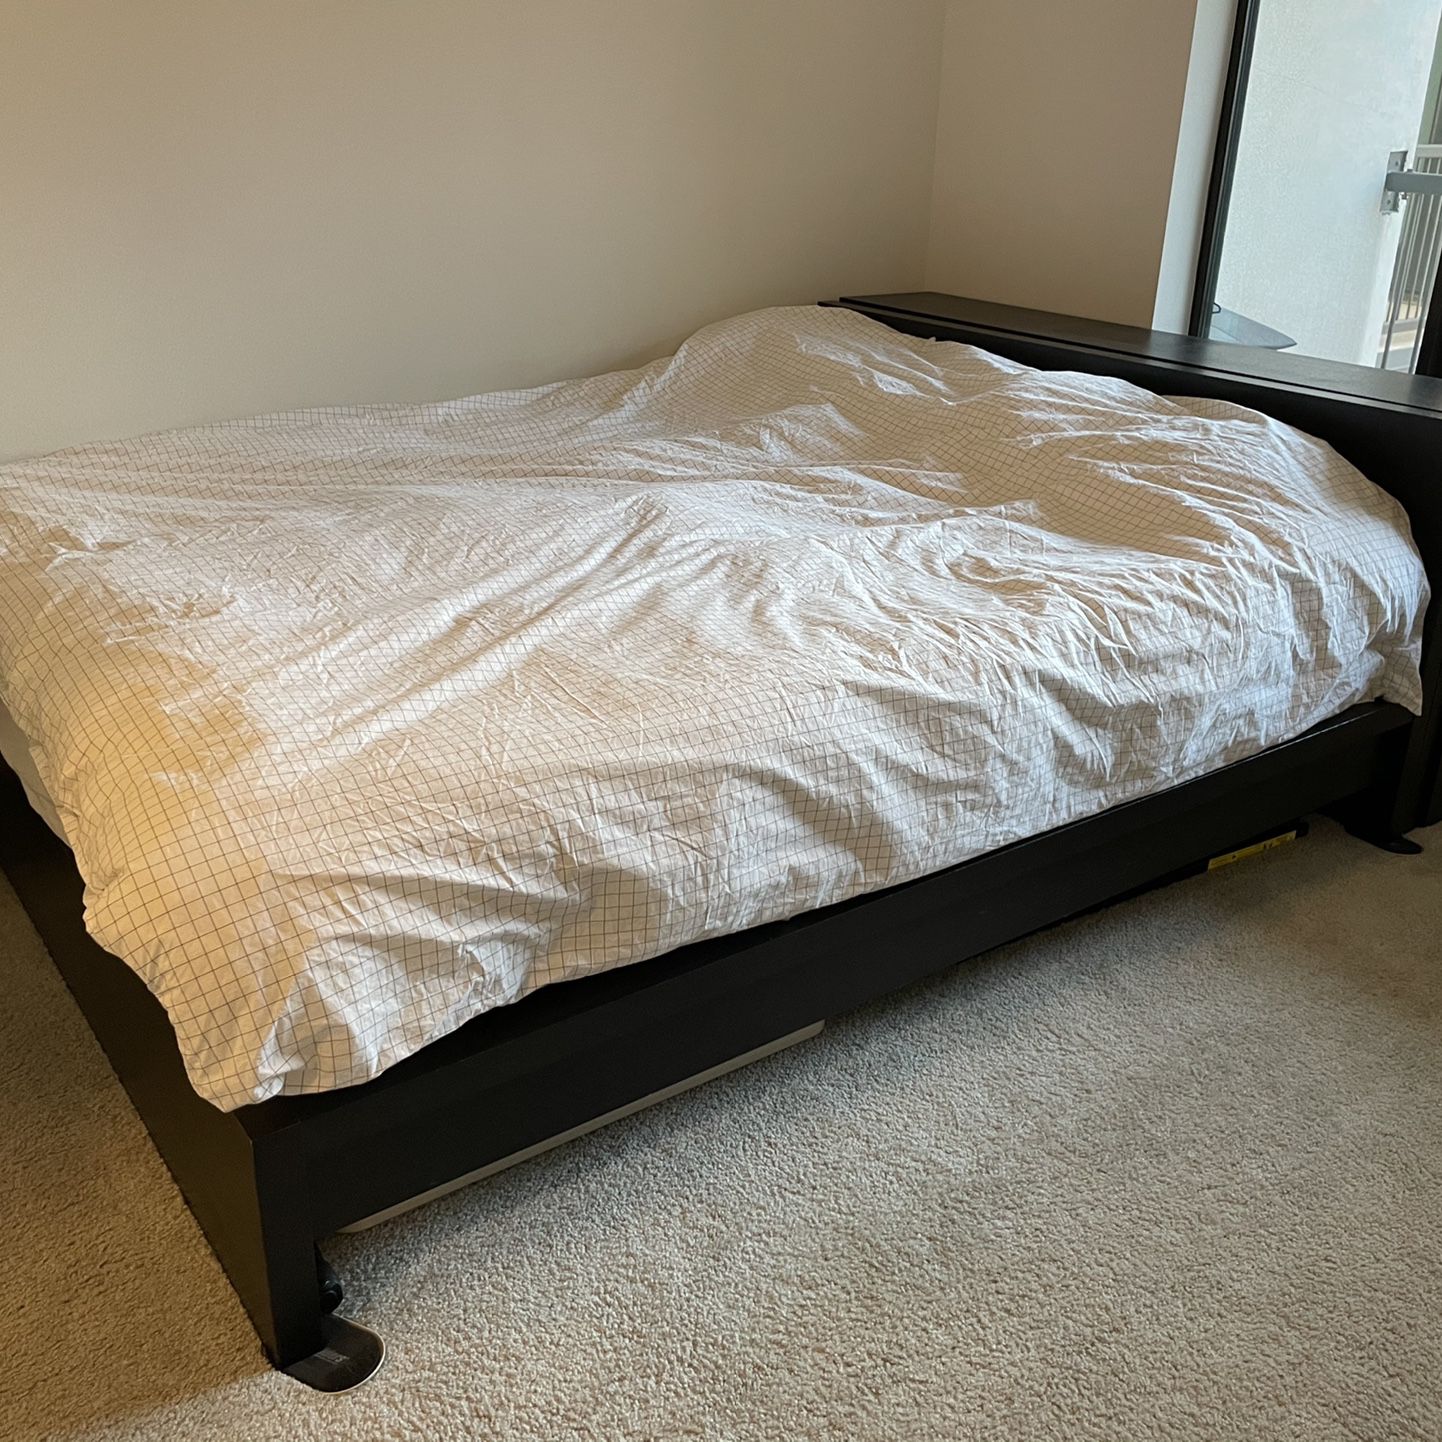 IKEA Bed With Pull Out Drawers